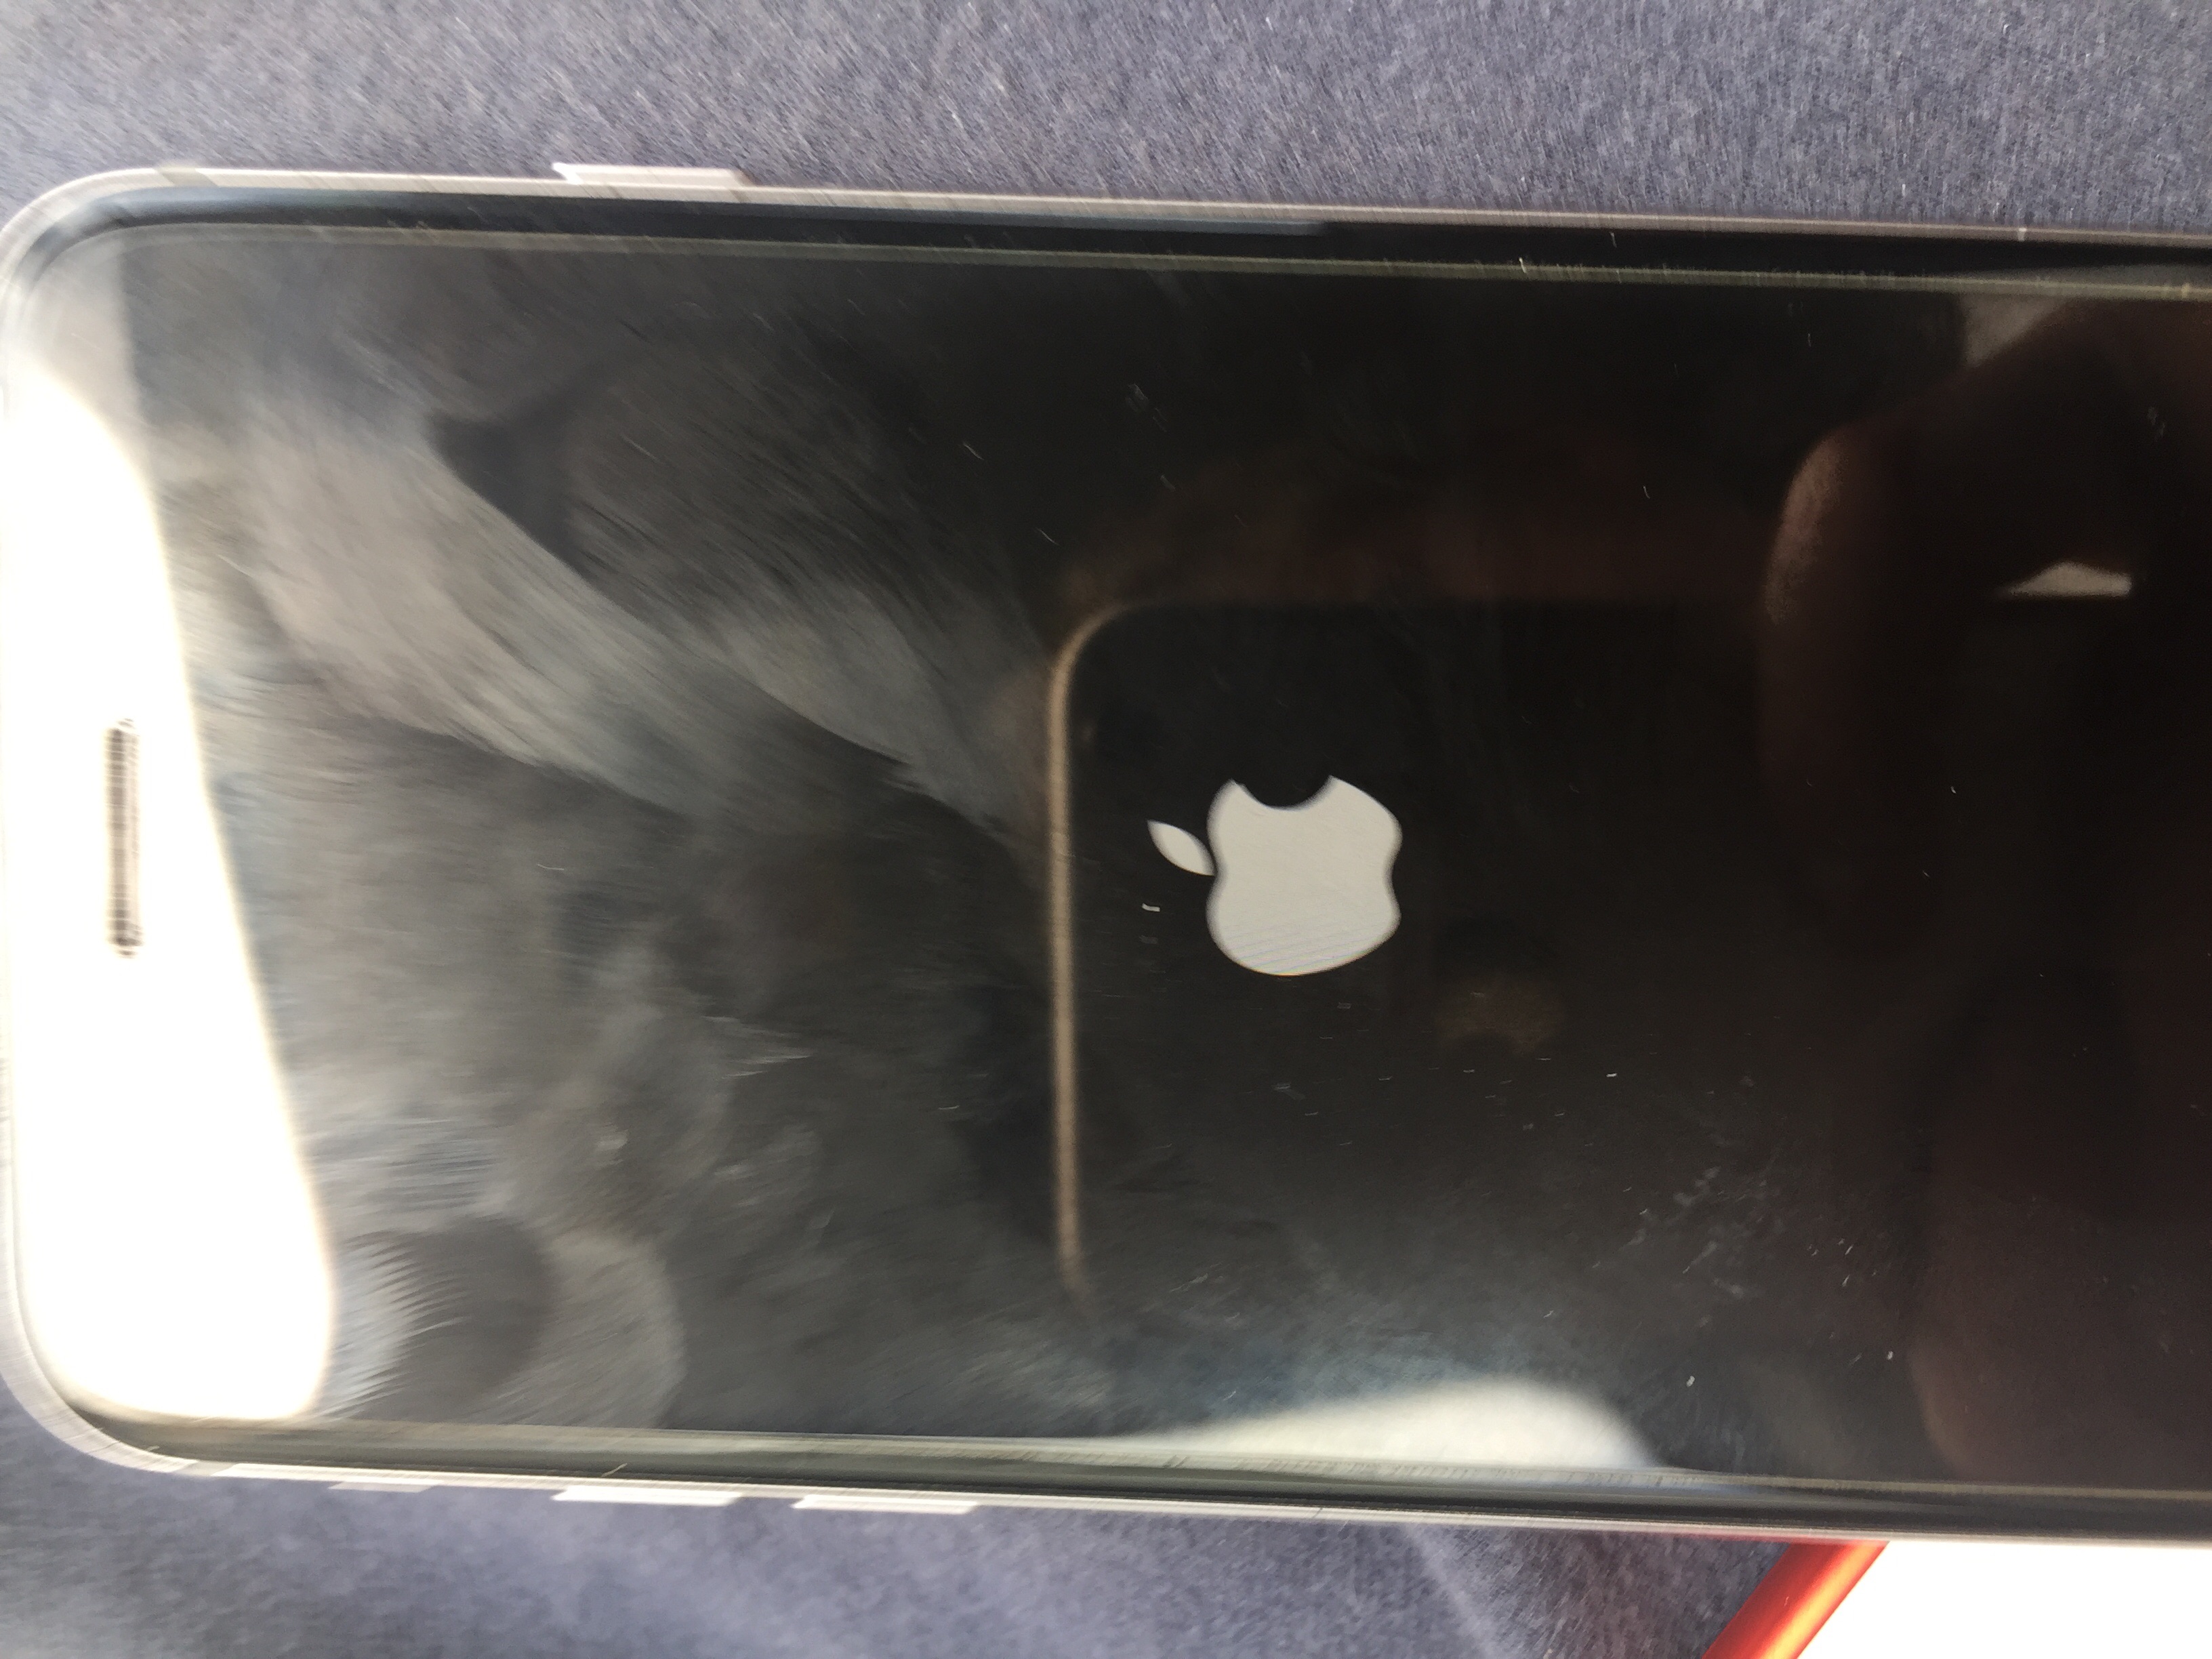 uanset Lege med mærke Can I remove my iPhone 6s hard drive to s… - Apple Community